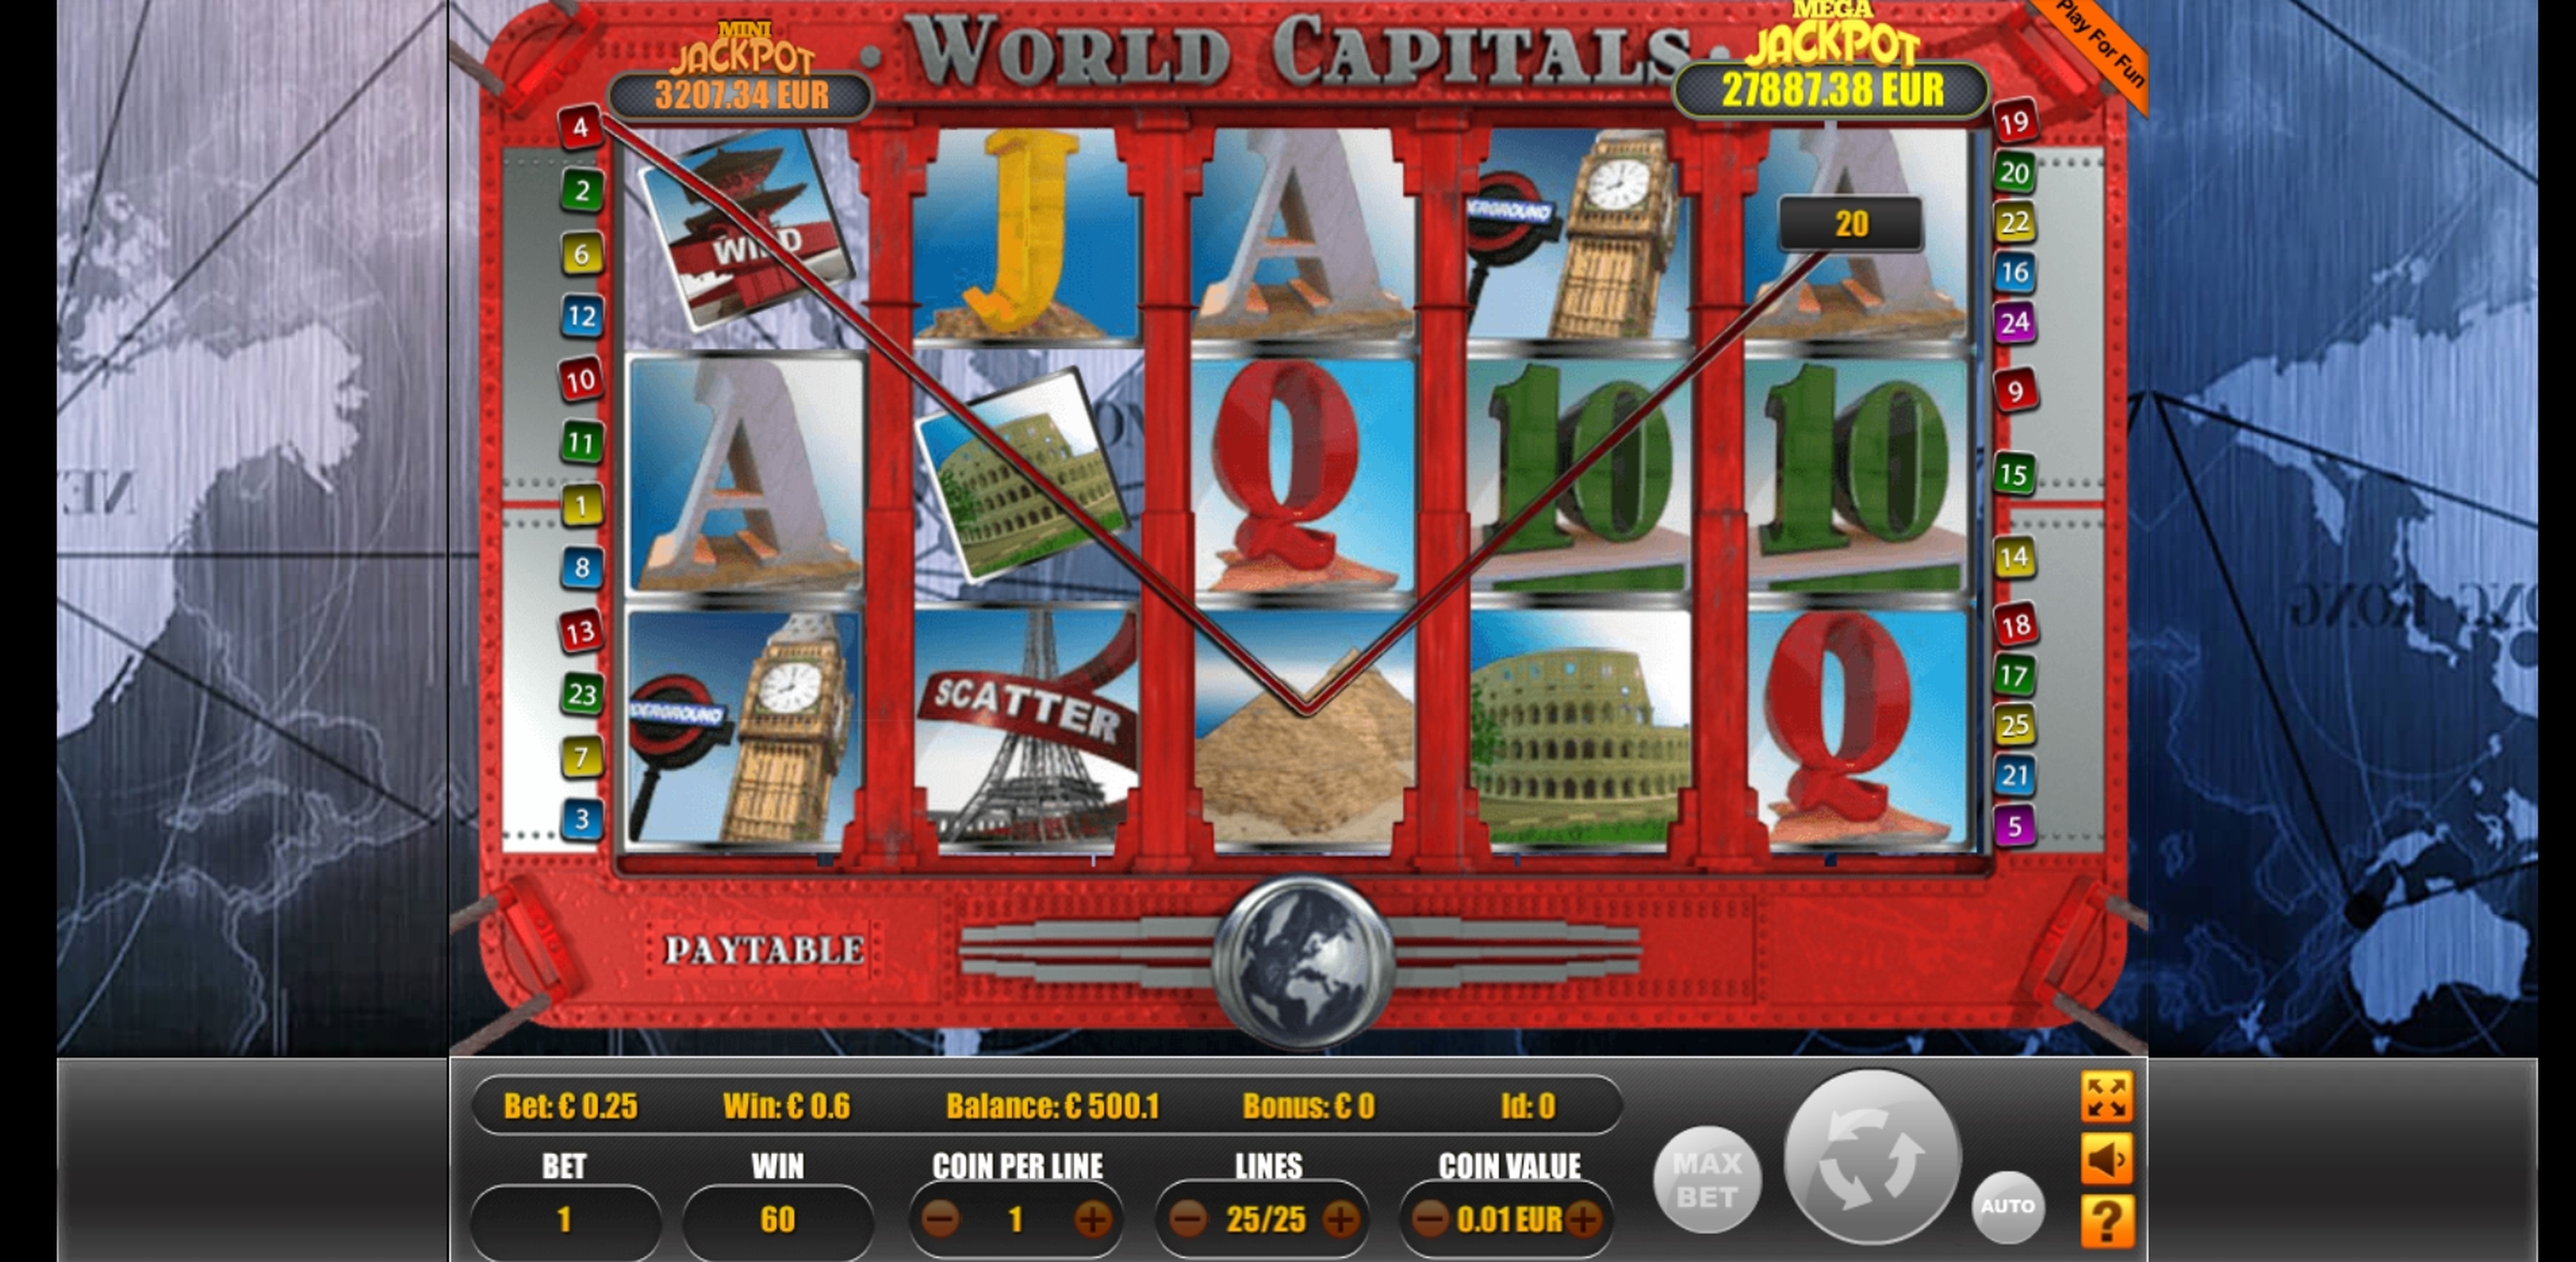 Win Money in World Capitals Free Slot Game by Portomaso Gaming